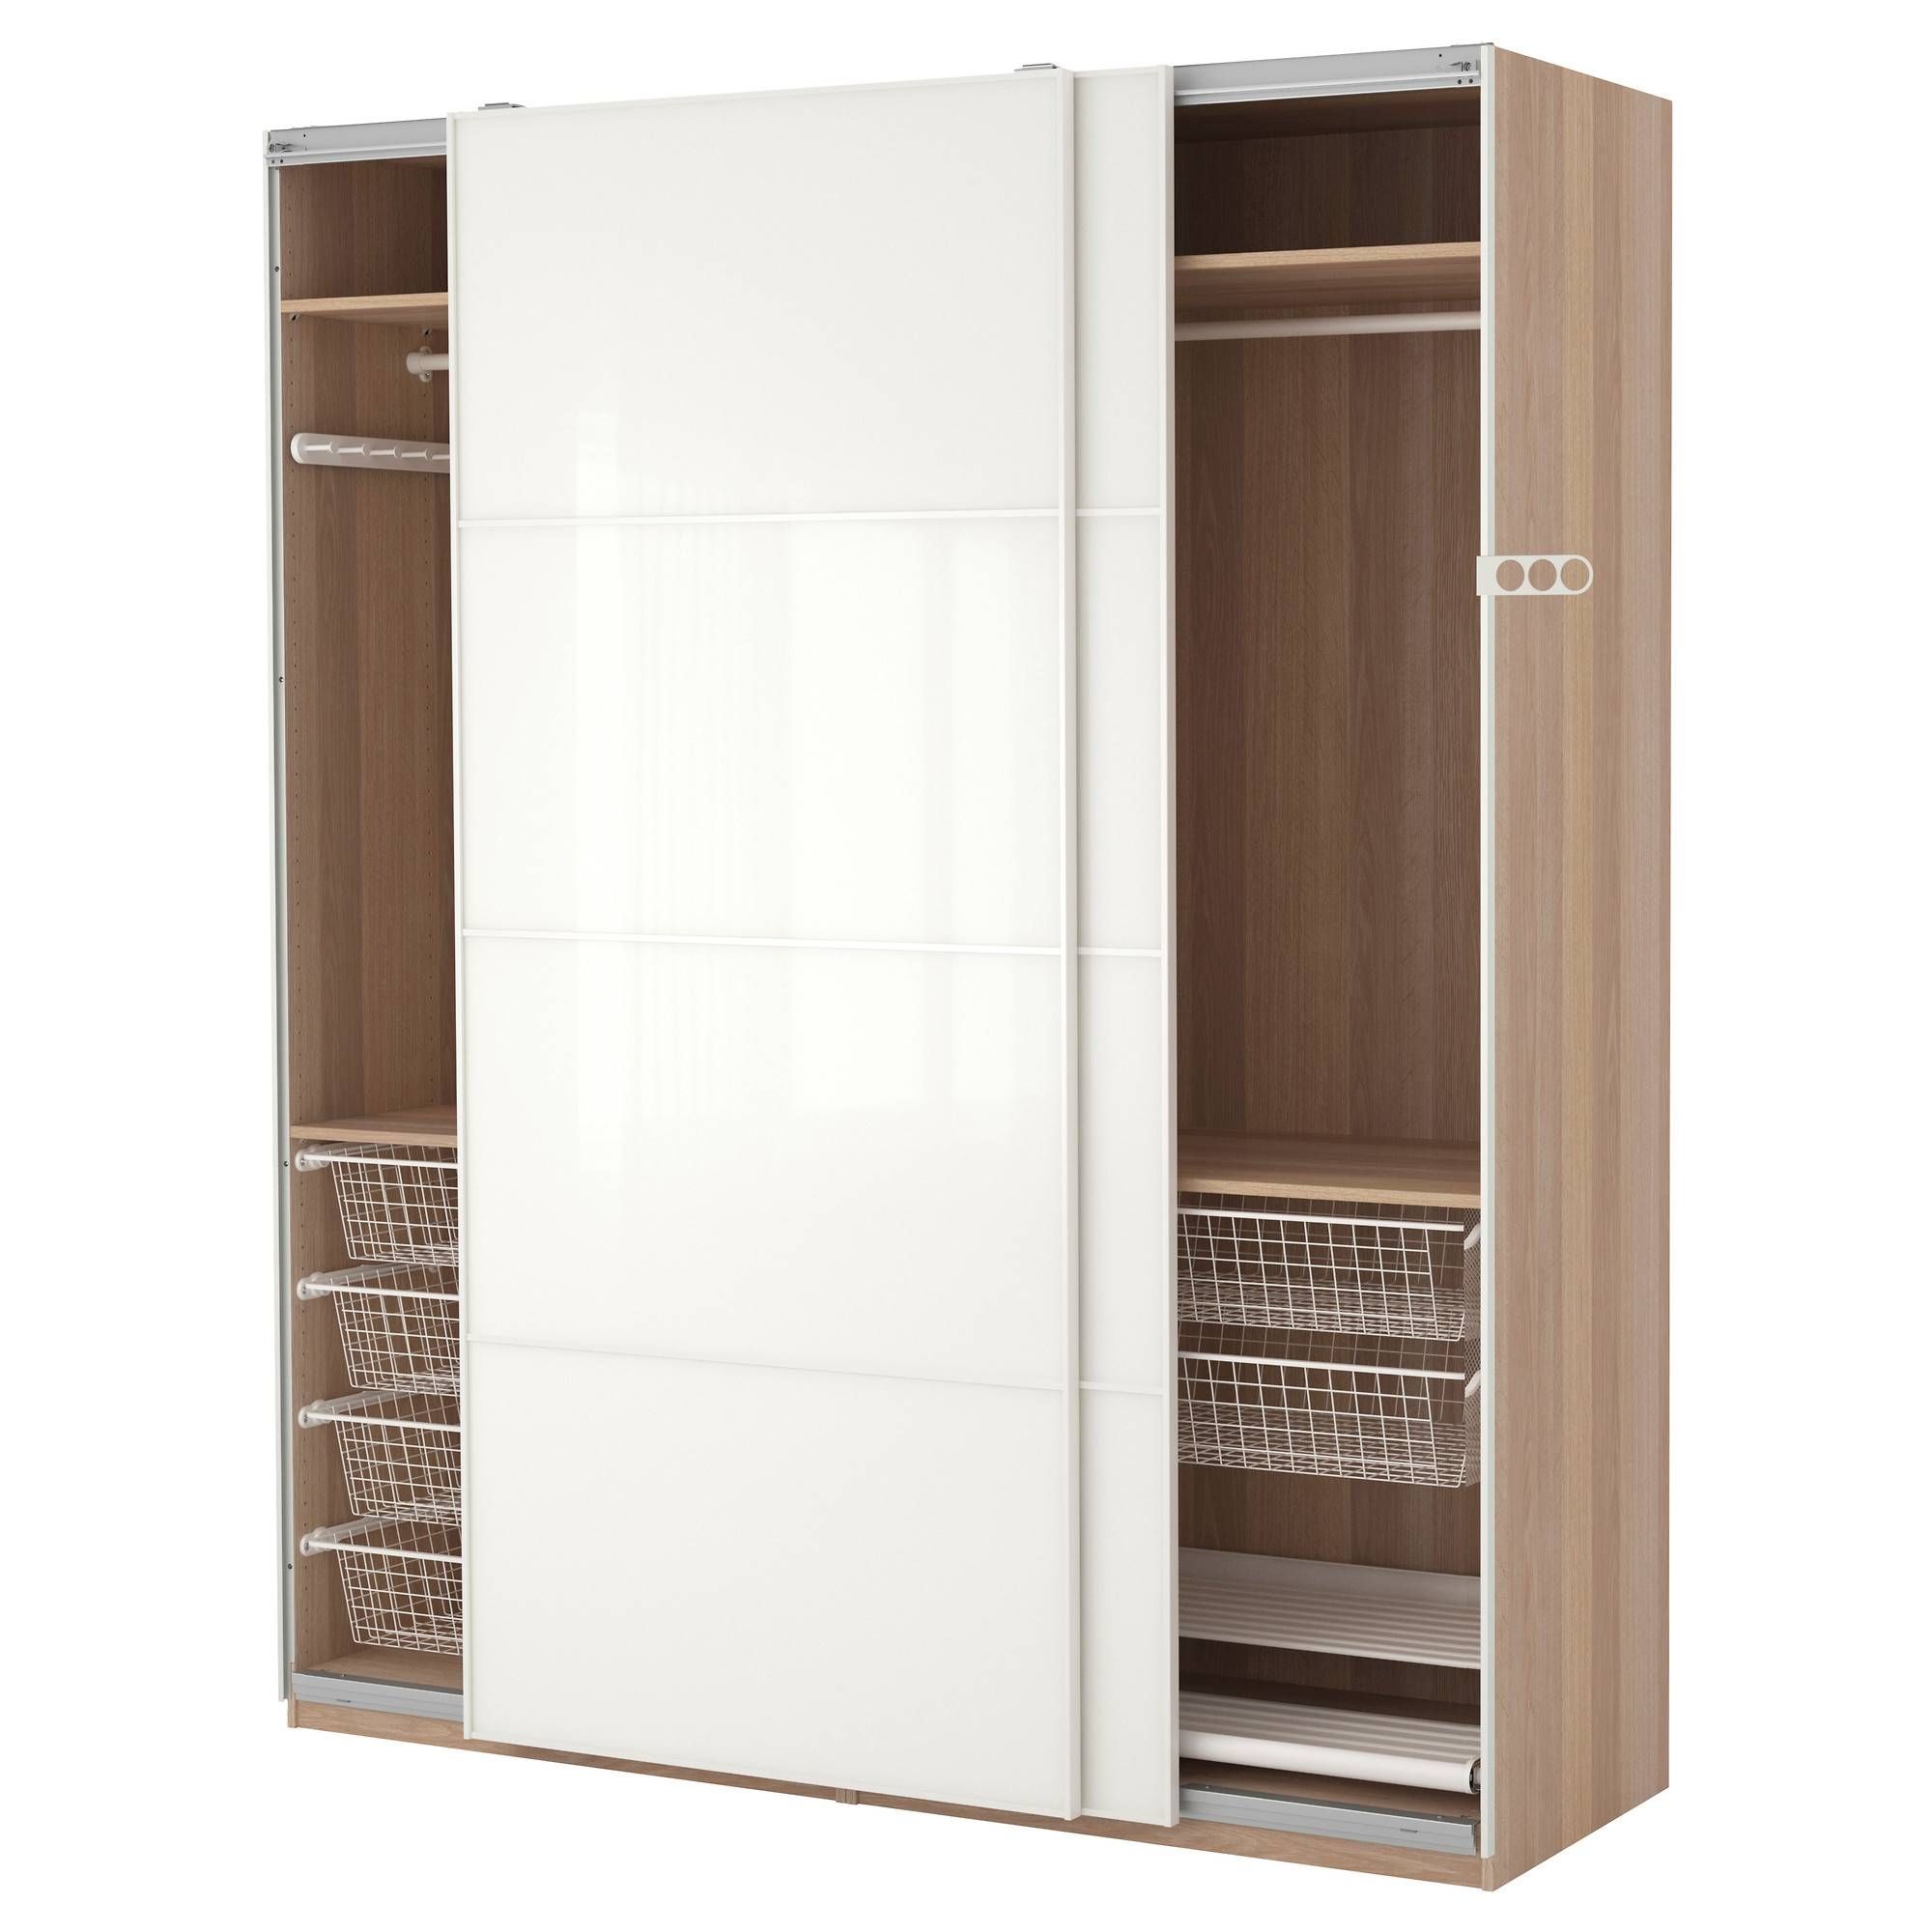 Fitted Modern Living Room Wardrobe Closed Made Of Wooden In Light With Regard To Solid Wood Fitted Wardrobe Doors (View 9 of 30)